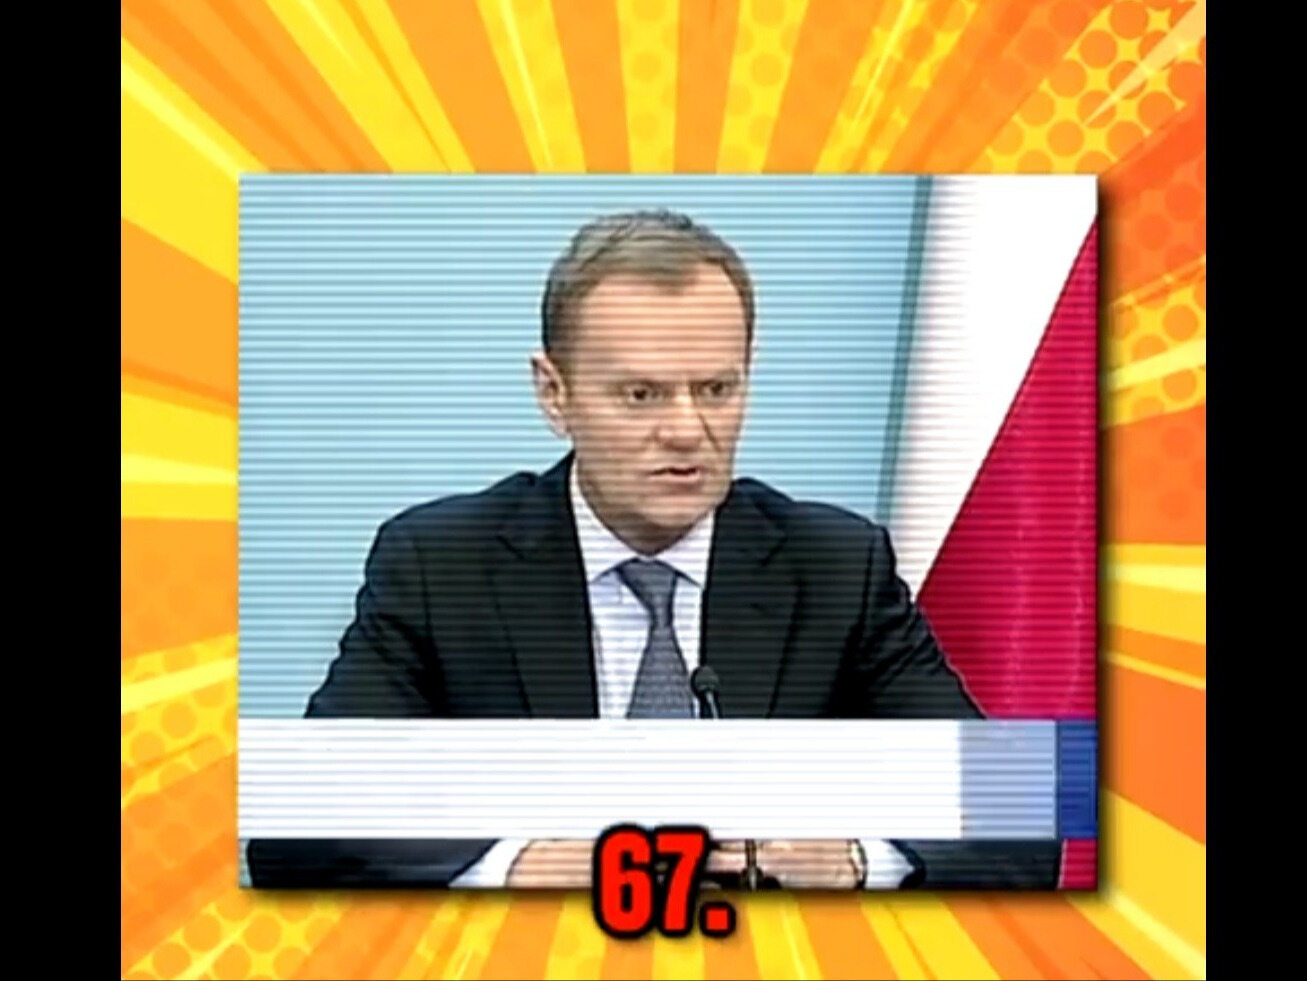 New PiS spot.  This is how Tusk "answers" to the referendum questions